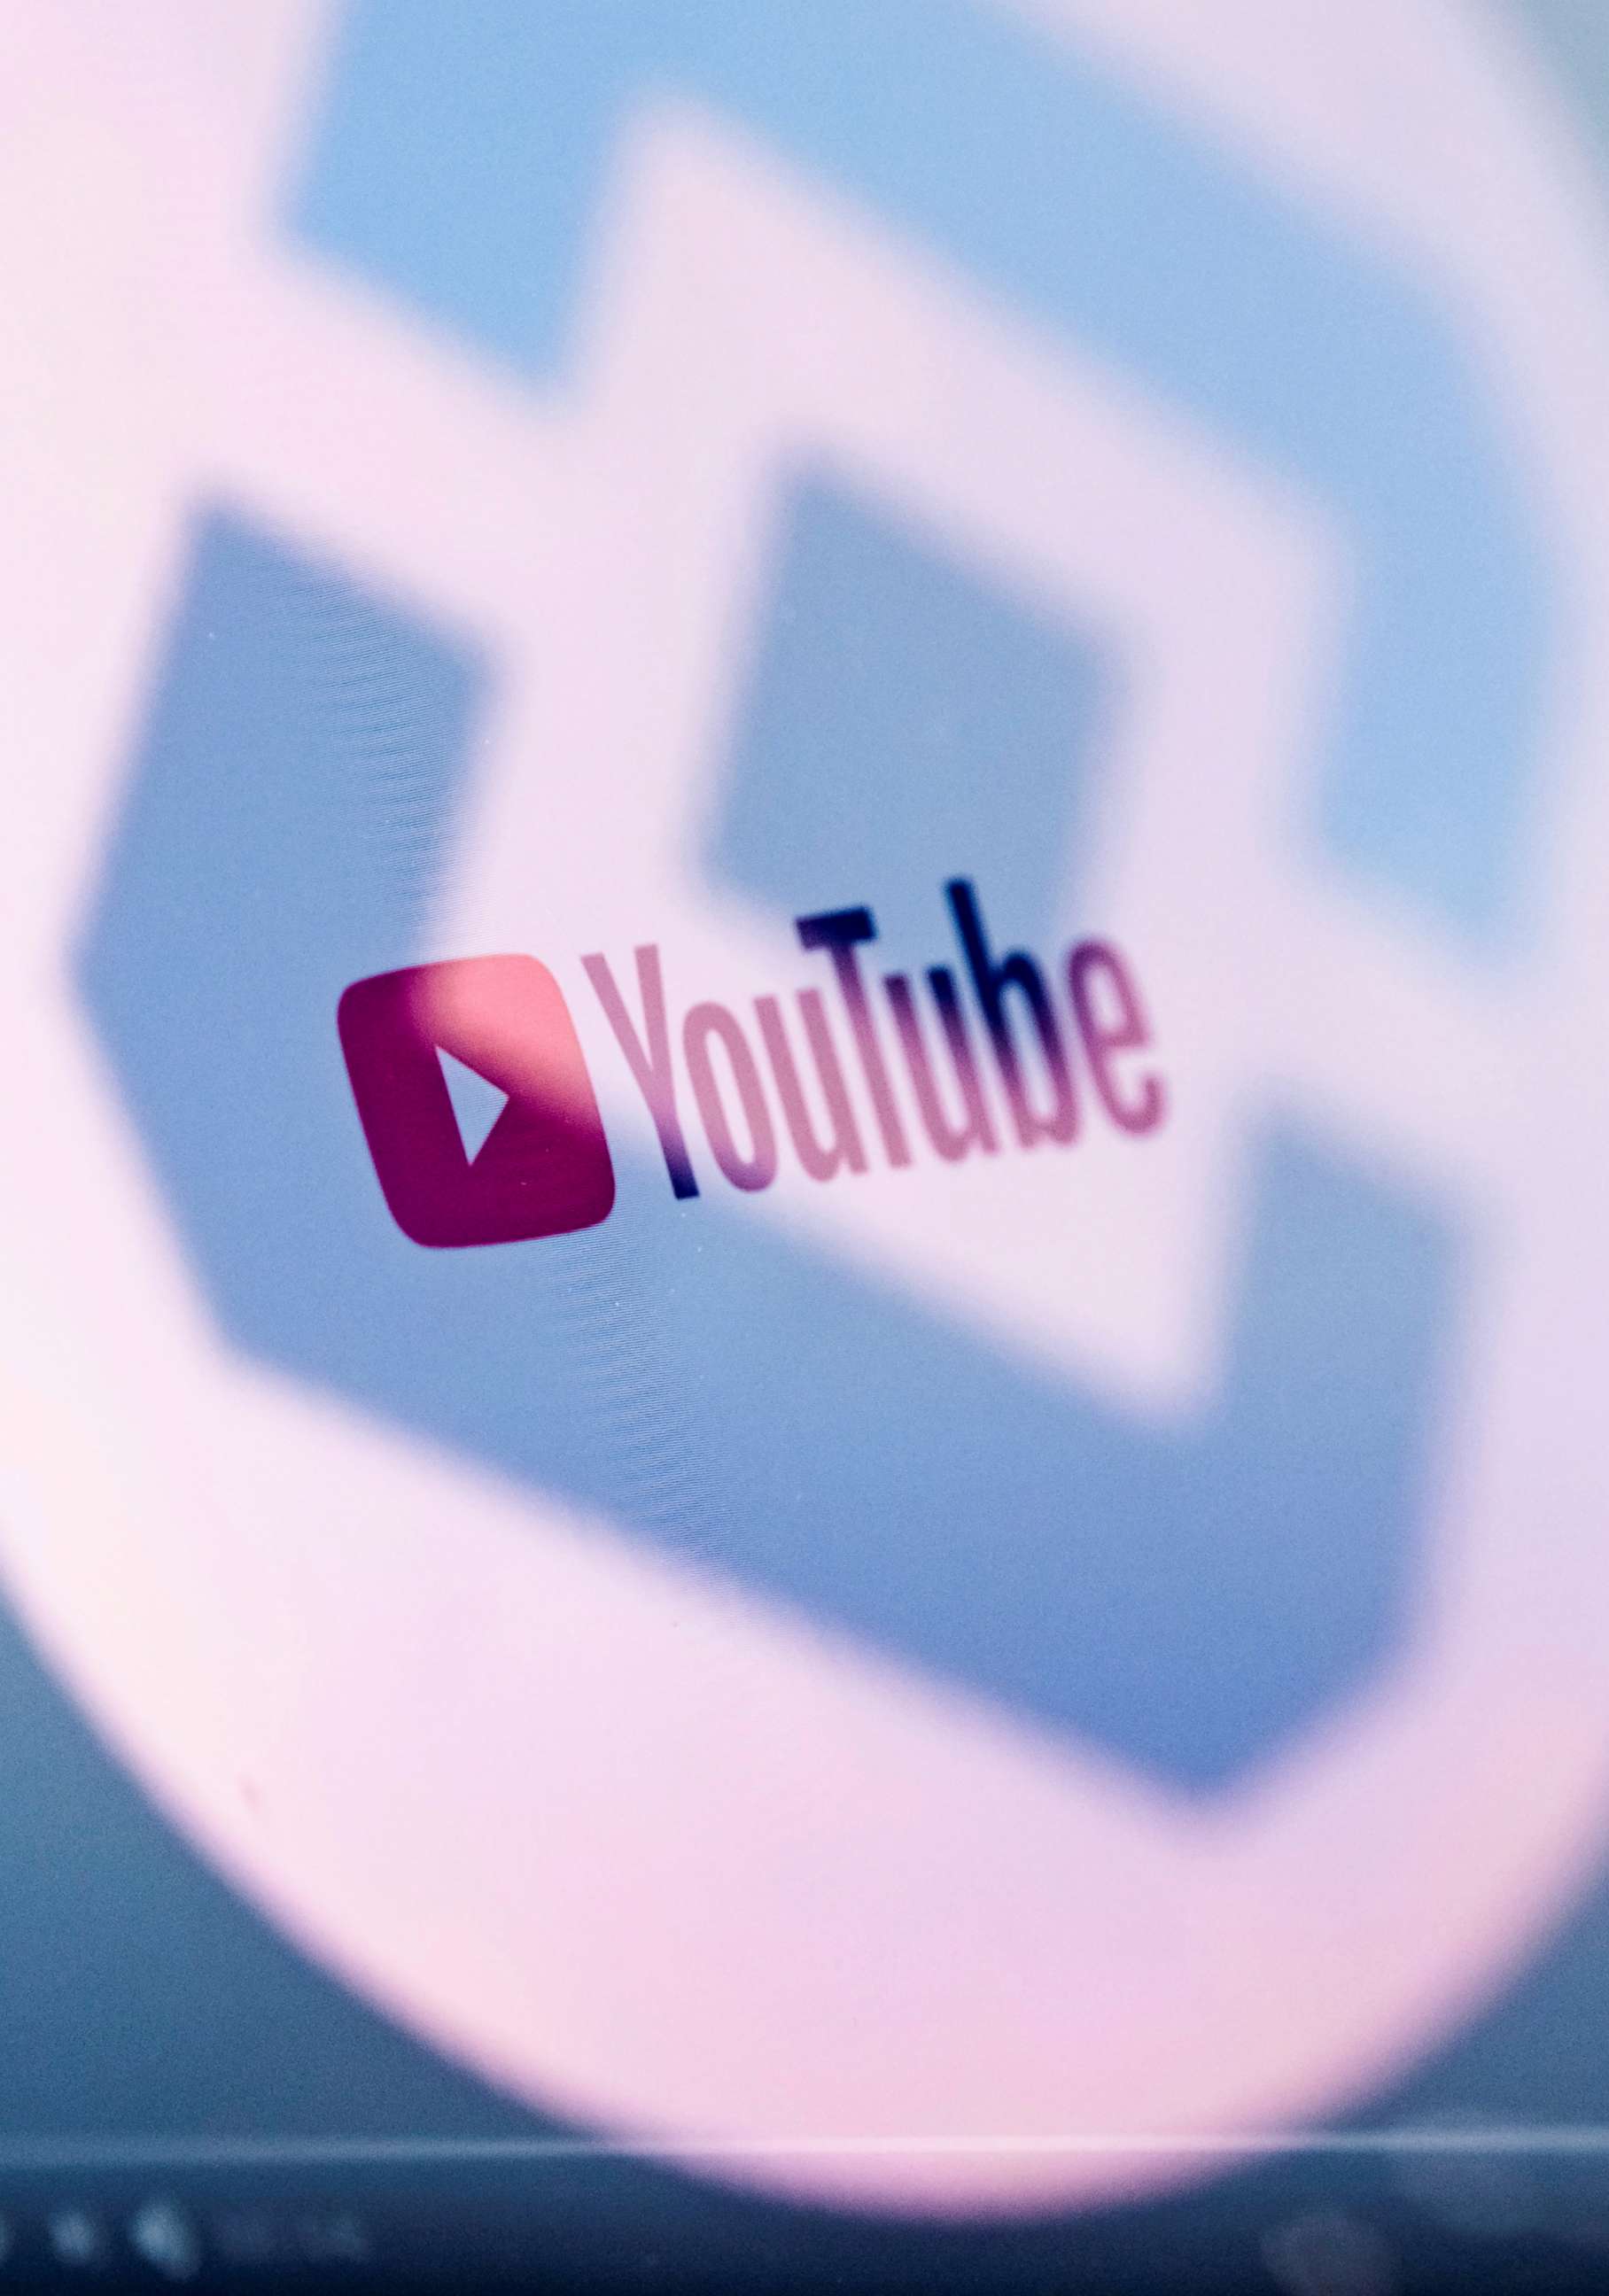 PHOTO: The logo of Russia's state communications regulator, Roskomnadzor, is reflected in a laptop screen showing a YouTube page, May 27, 2021.